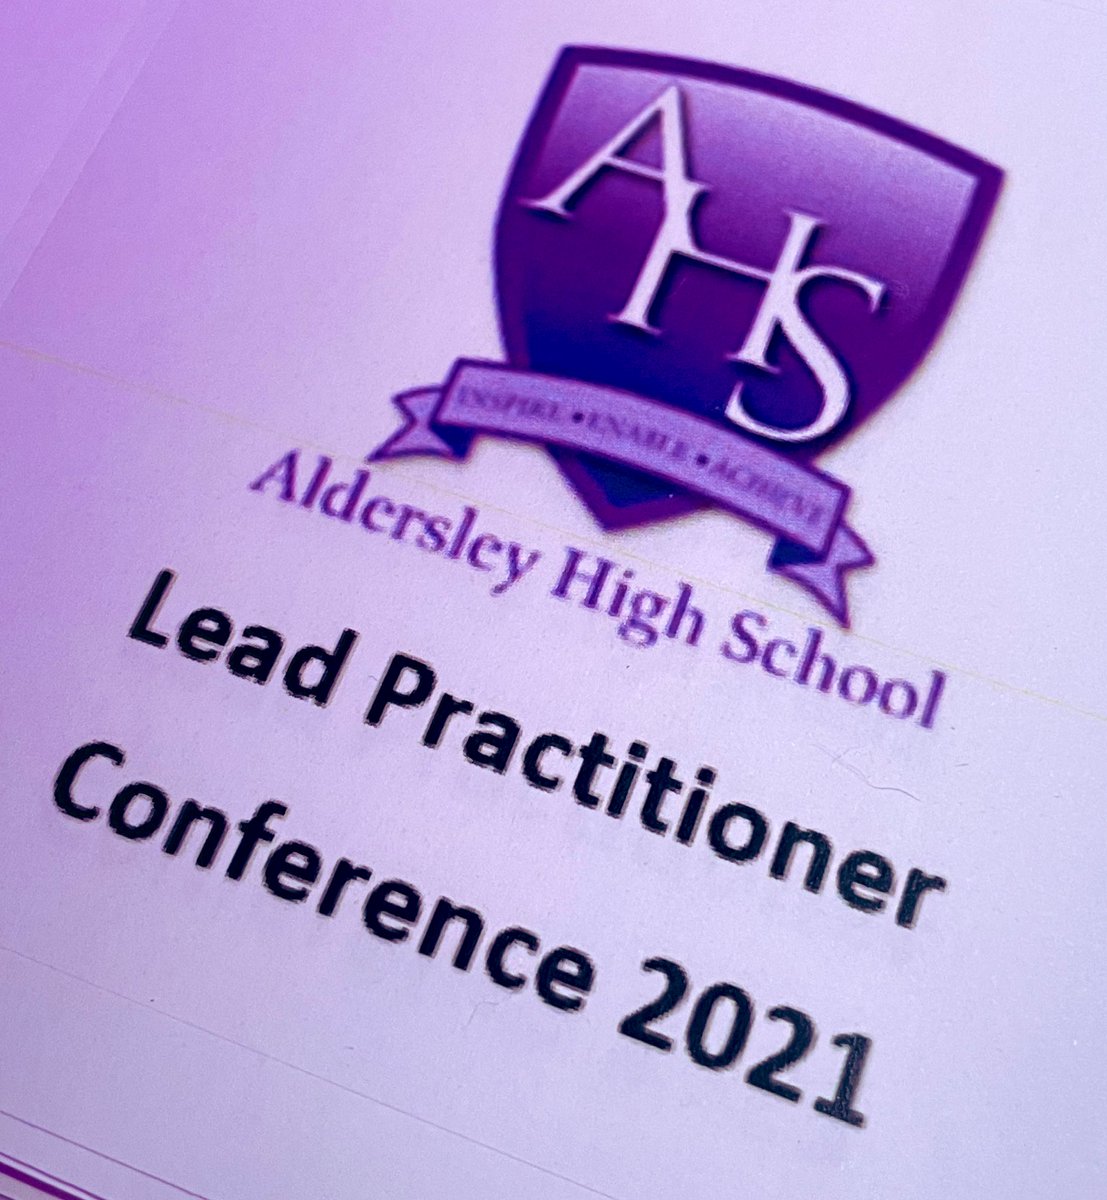 Can’t lie, I’m so excited for tomorrow’s #LeadPractitioner #Conference! Really looking forward to bringing the team together. @AldersleyHighSc 💜#edutwitter #teacherlife #CPD #CareerGoals #careerdevelopment @MrsSTaylorEng @i_b_cazza_bee @miss_scastro @MissKeoghAHS @ZLynchAHS 👩🏻‍🏫📚